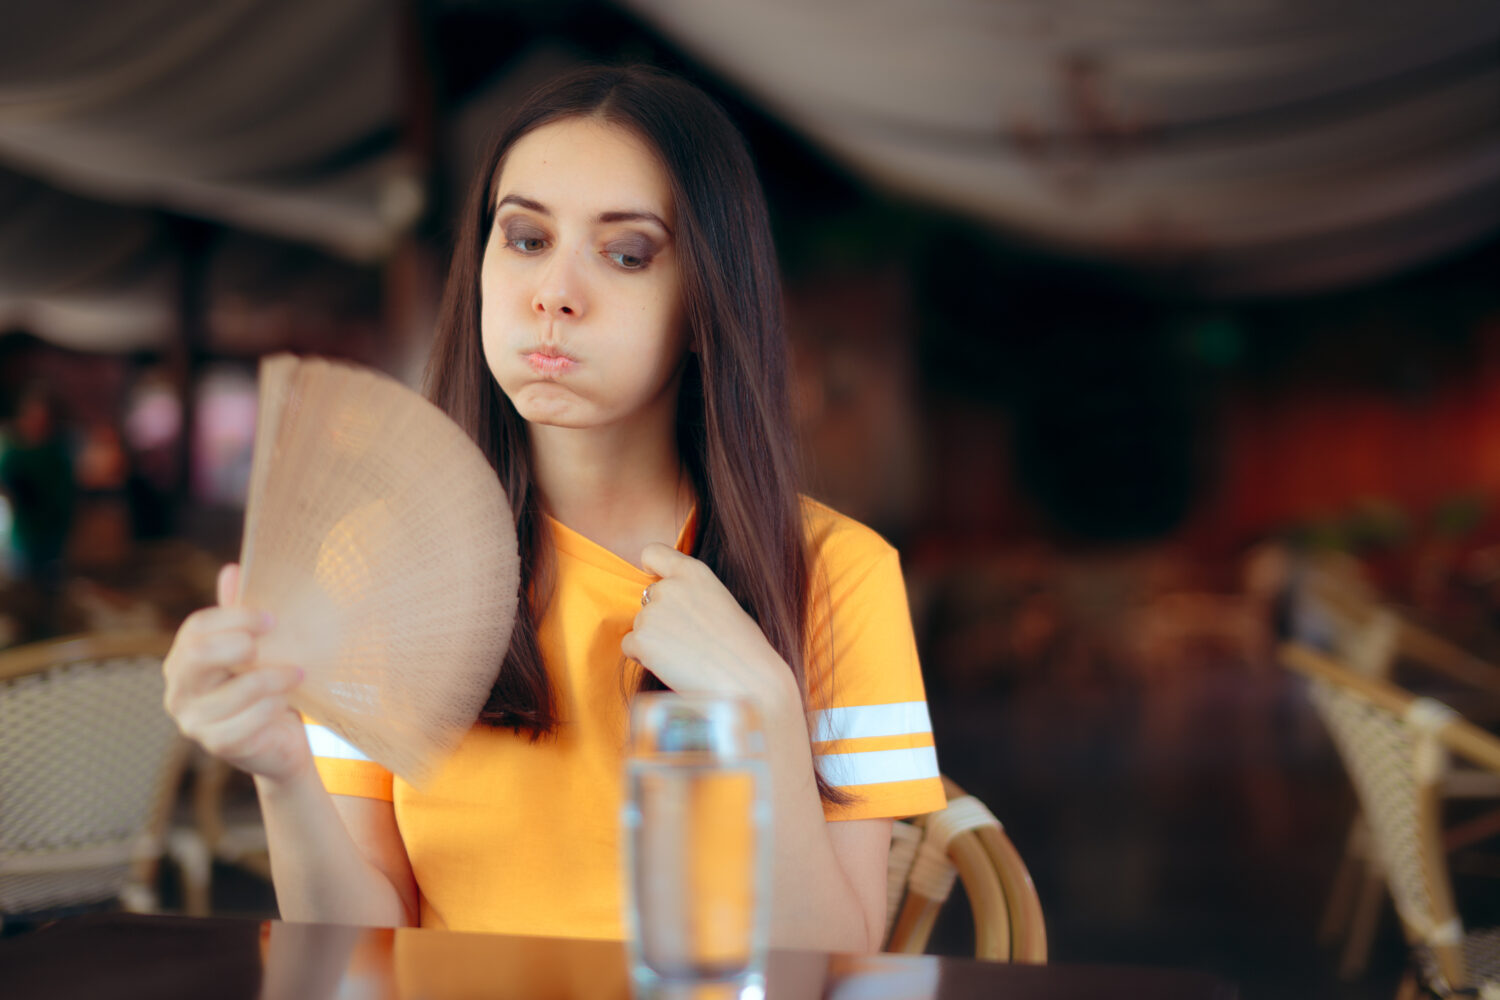 Woman in a Restaurant Fighting Heat Waves with a Fan